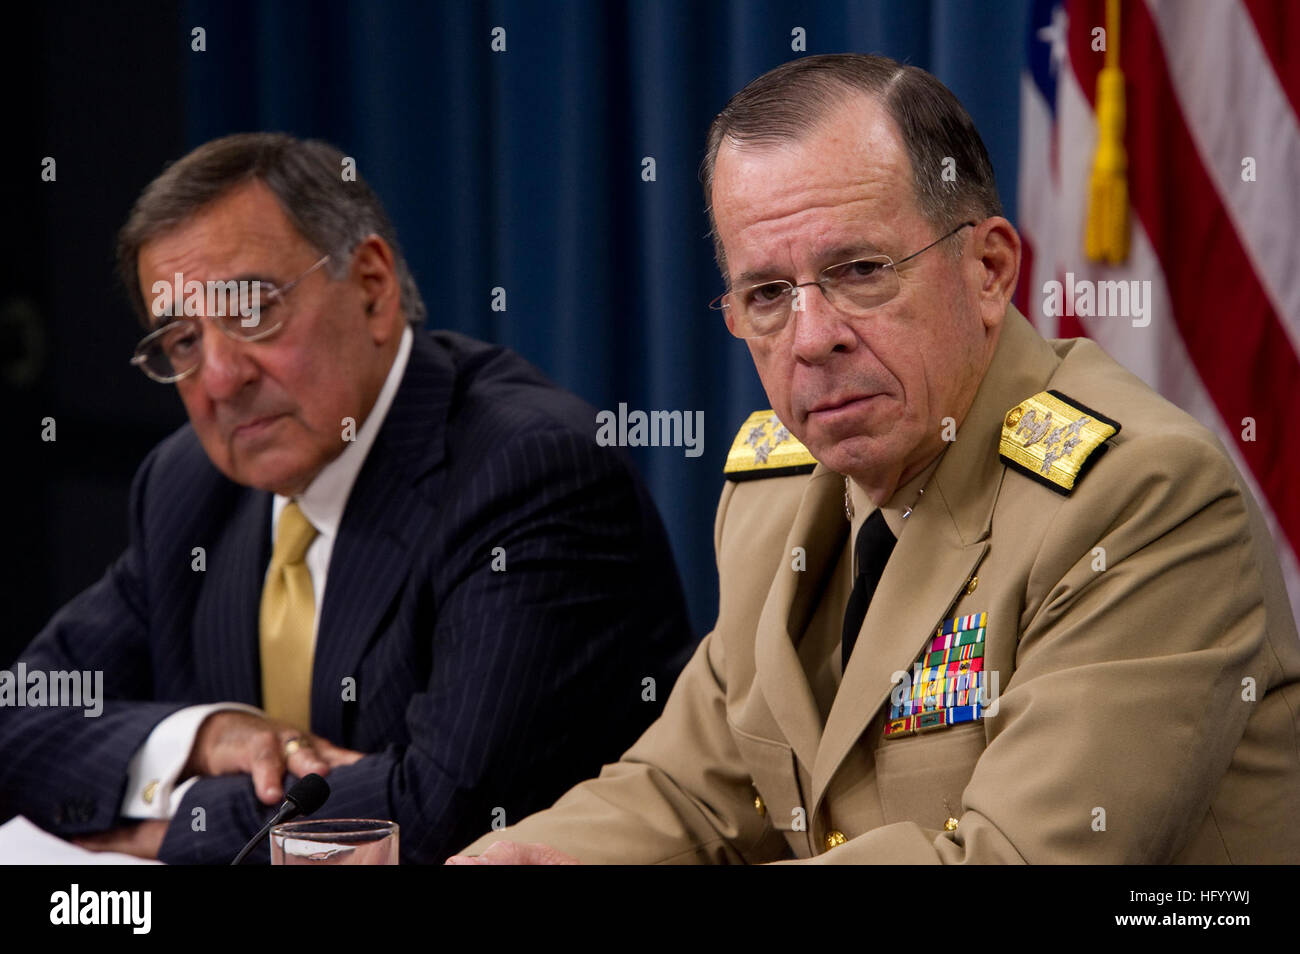 110804-N-TT977-381 ARLINGTON, Va. (Aug. 4, 2011) Secretary of Defense Leon Panetta and Chairman of the Joint Chiefs of Staff Adm. Mike Mullen address the media during a press availability at the Pentagon. (U.S. Navy photo by Mass Communication Specialist 1st Class Chad J. McNeeley/Released) US Navy 110804-N-TT977-381 Secretary of Defense Leon Panetta and Chairman of the Joint Chiefs of Staff Adm. Mike Mullen address the media during a Stock Photo